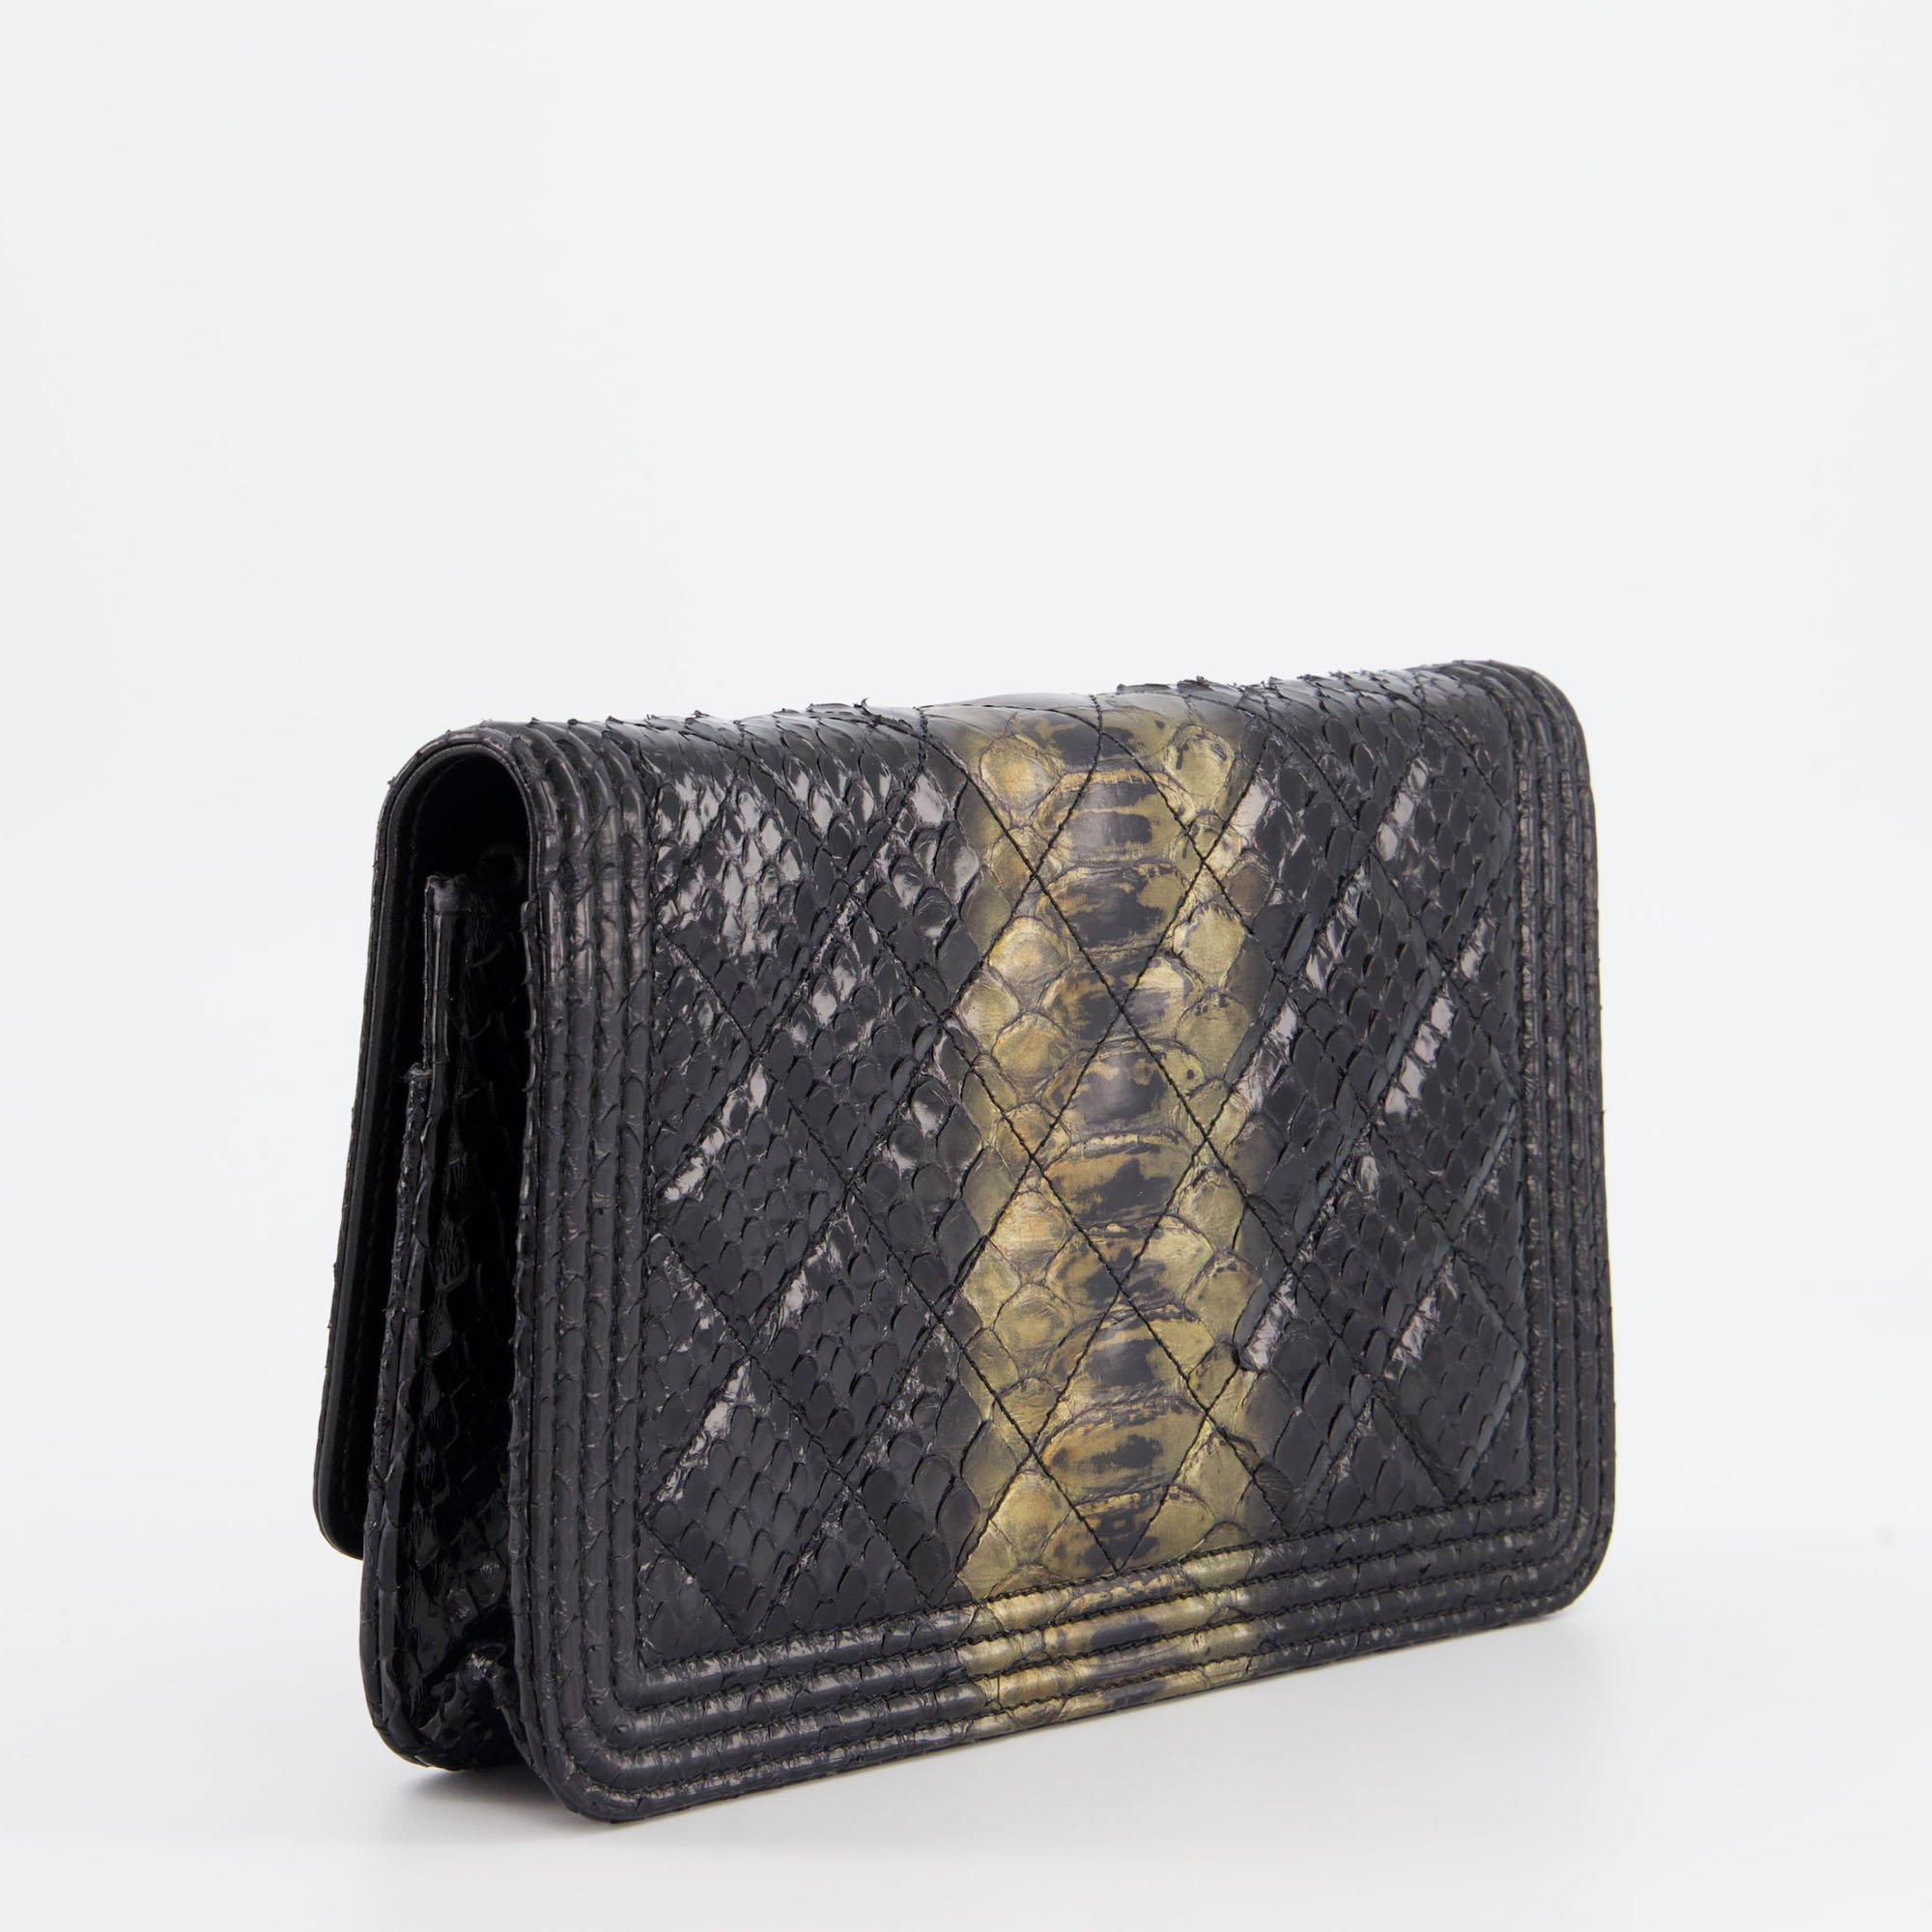 Chanel Black And Gold Wallet On Chain Bag In Python With Ruthenium Hardware